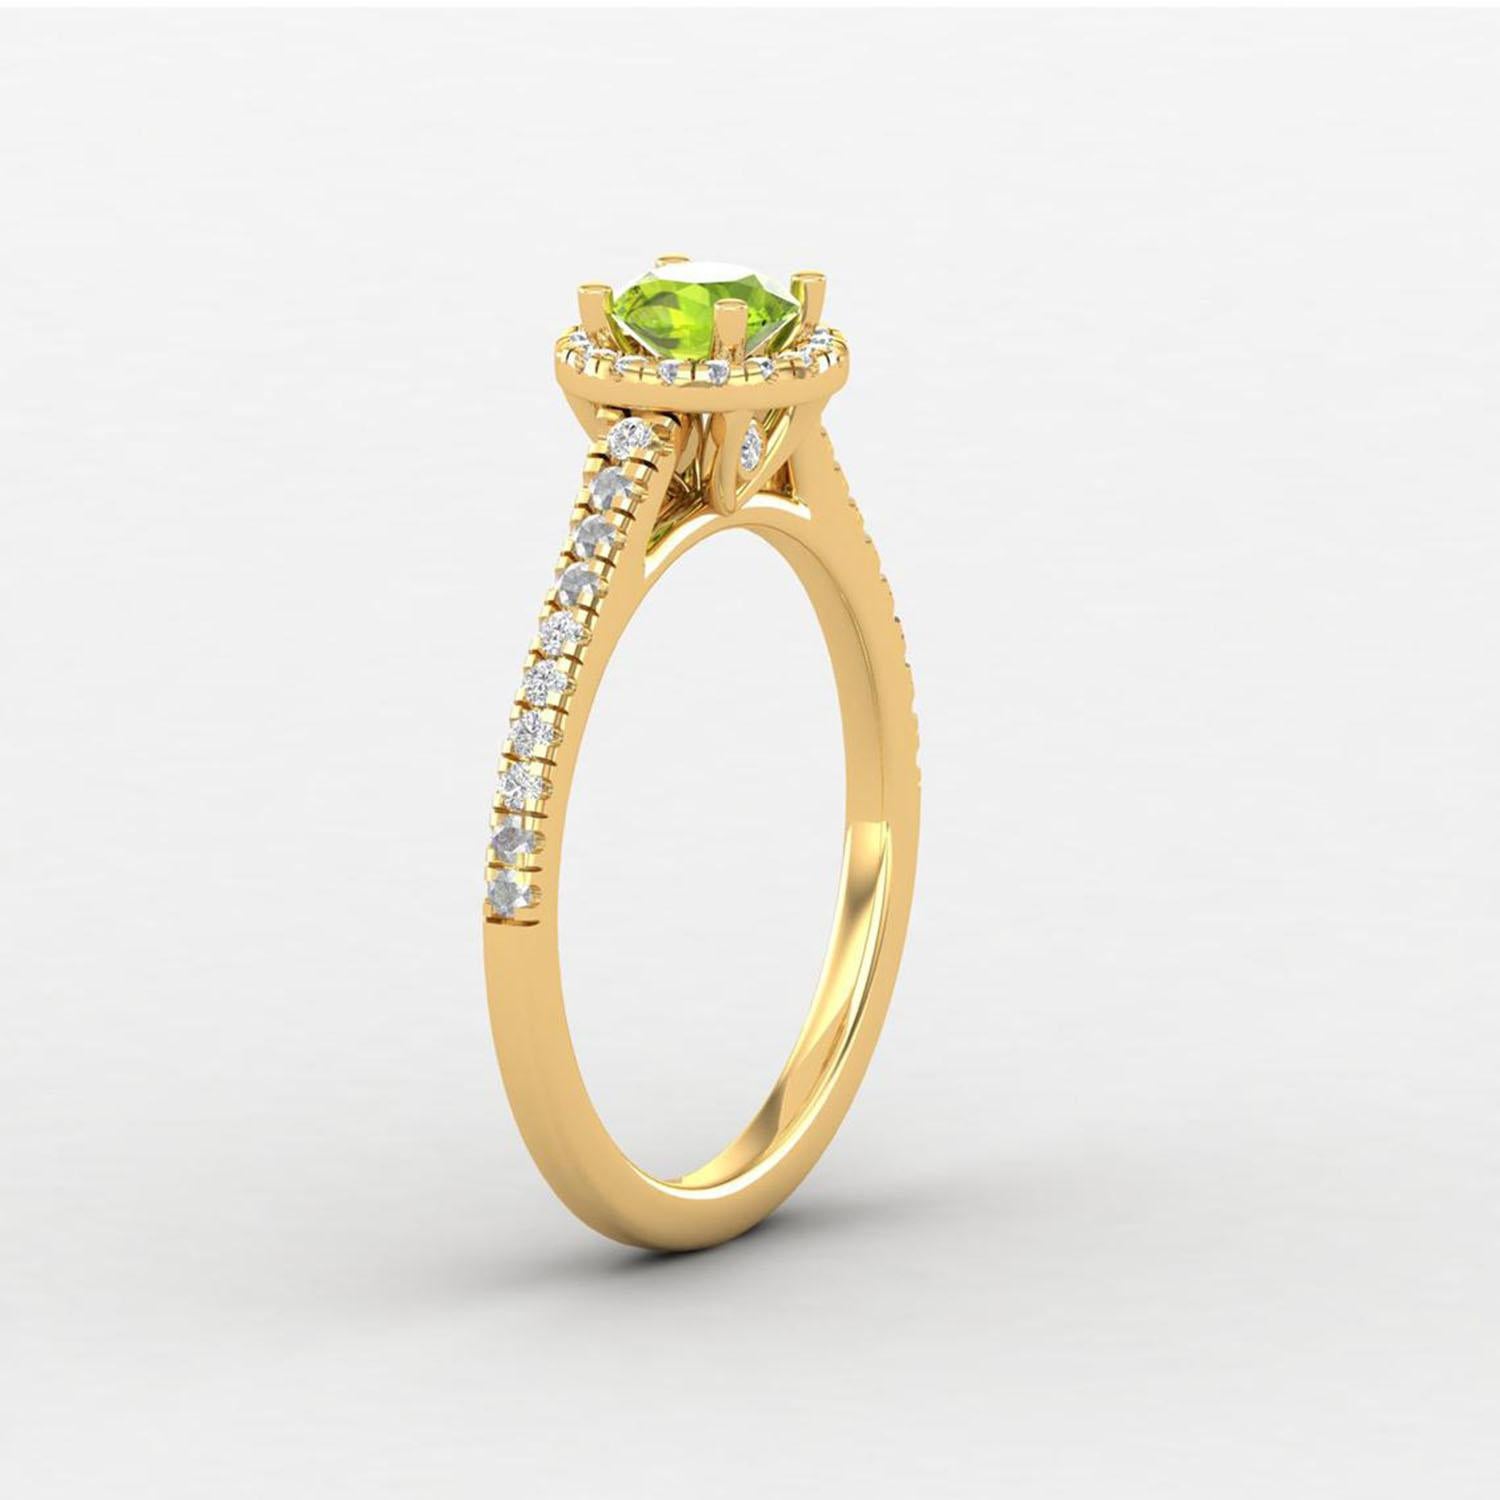 Round Cut 14 Karat Gold Peridot Ring / Round Diamond Ring / Solitaire Ring For Sale